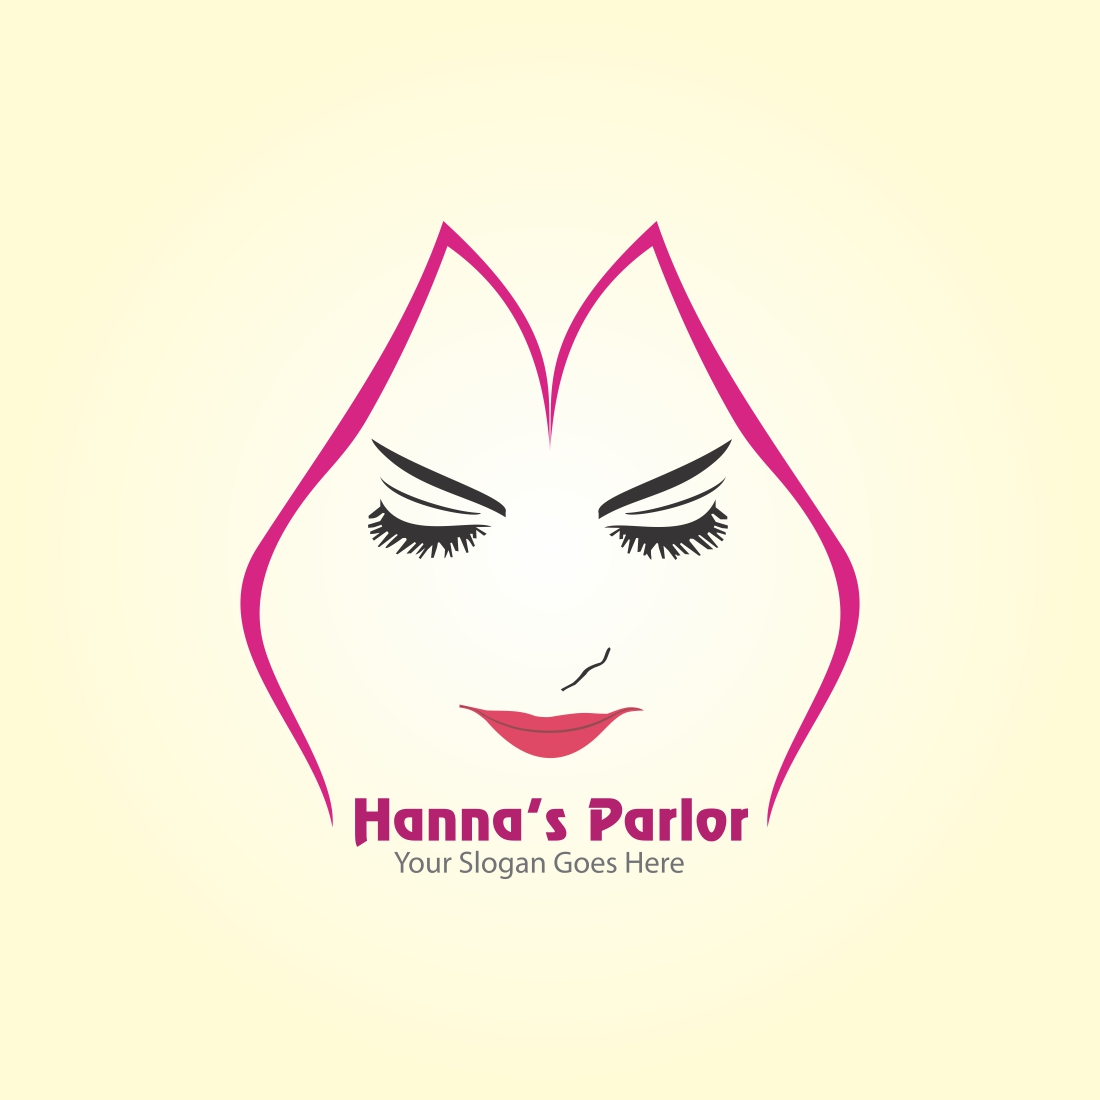 Hanna's Beauty Parlor Logo Template cover image.